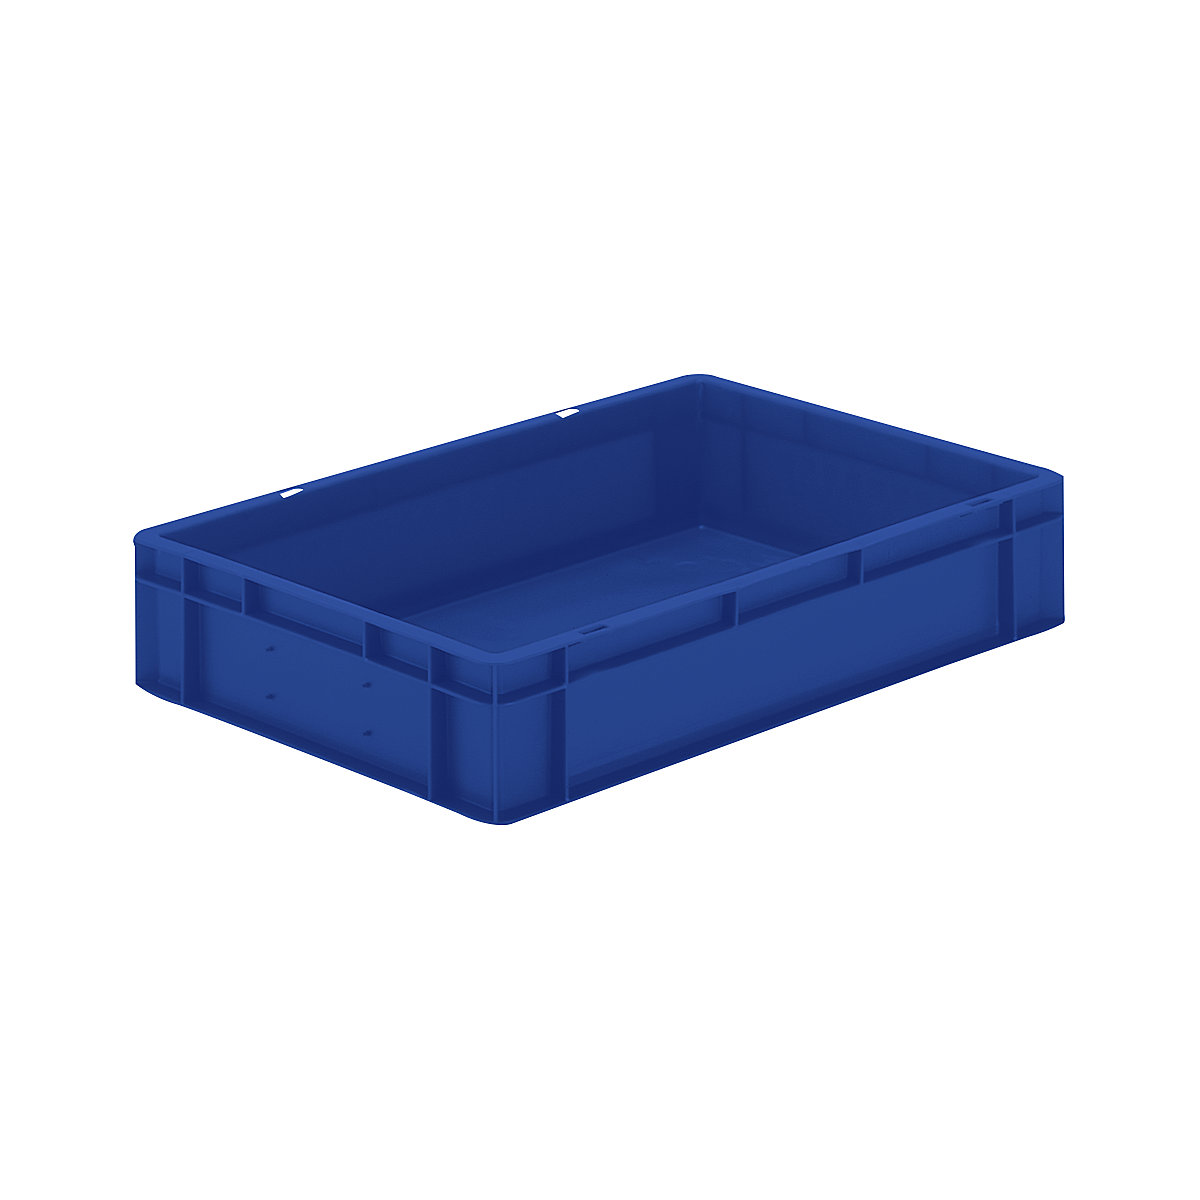 Euro stacking container, closed walls and base, LxWxH 600 x 400 x 120 mm, blue, pack of 5-6